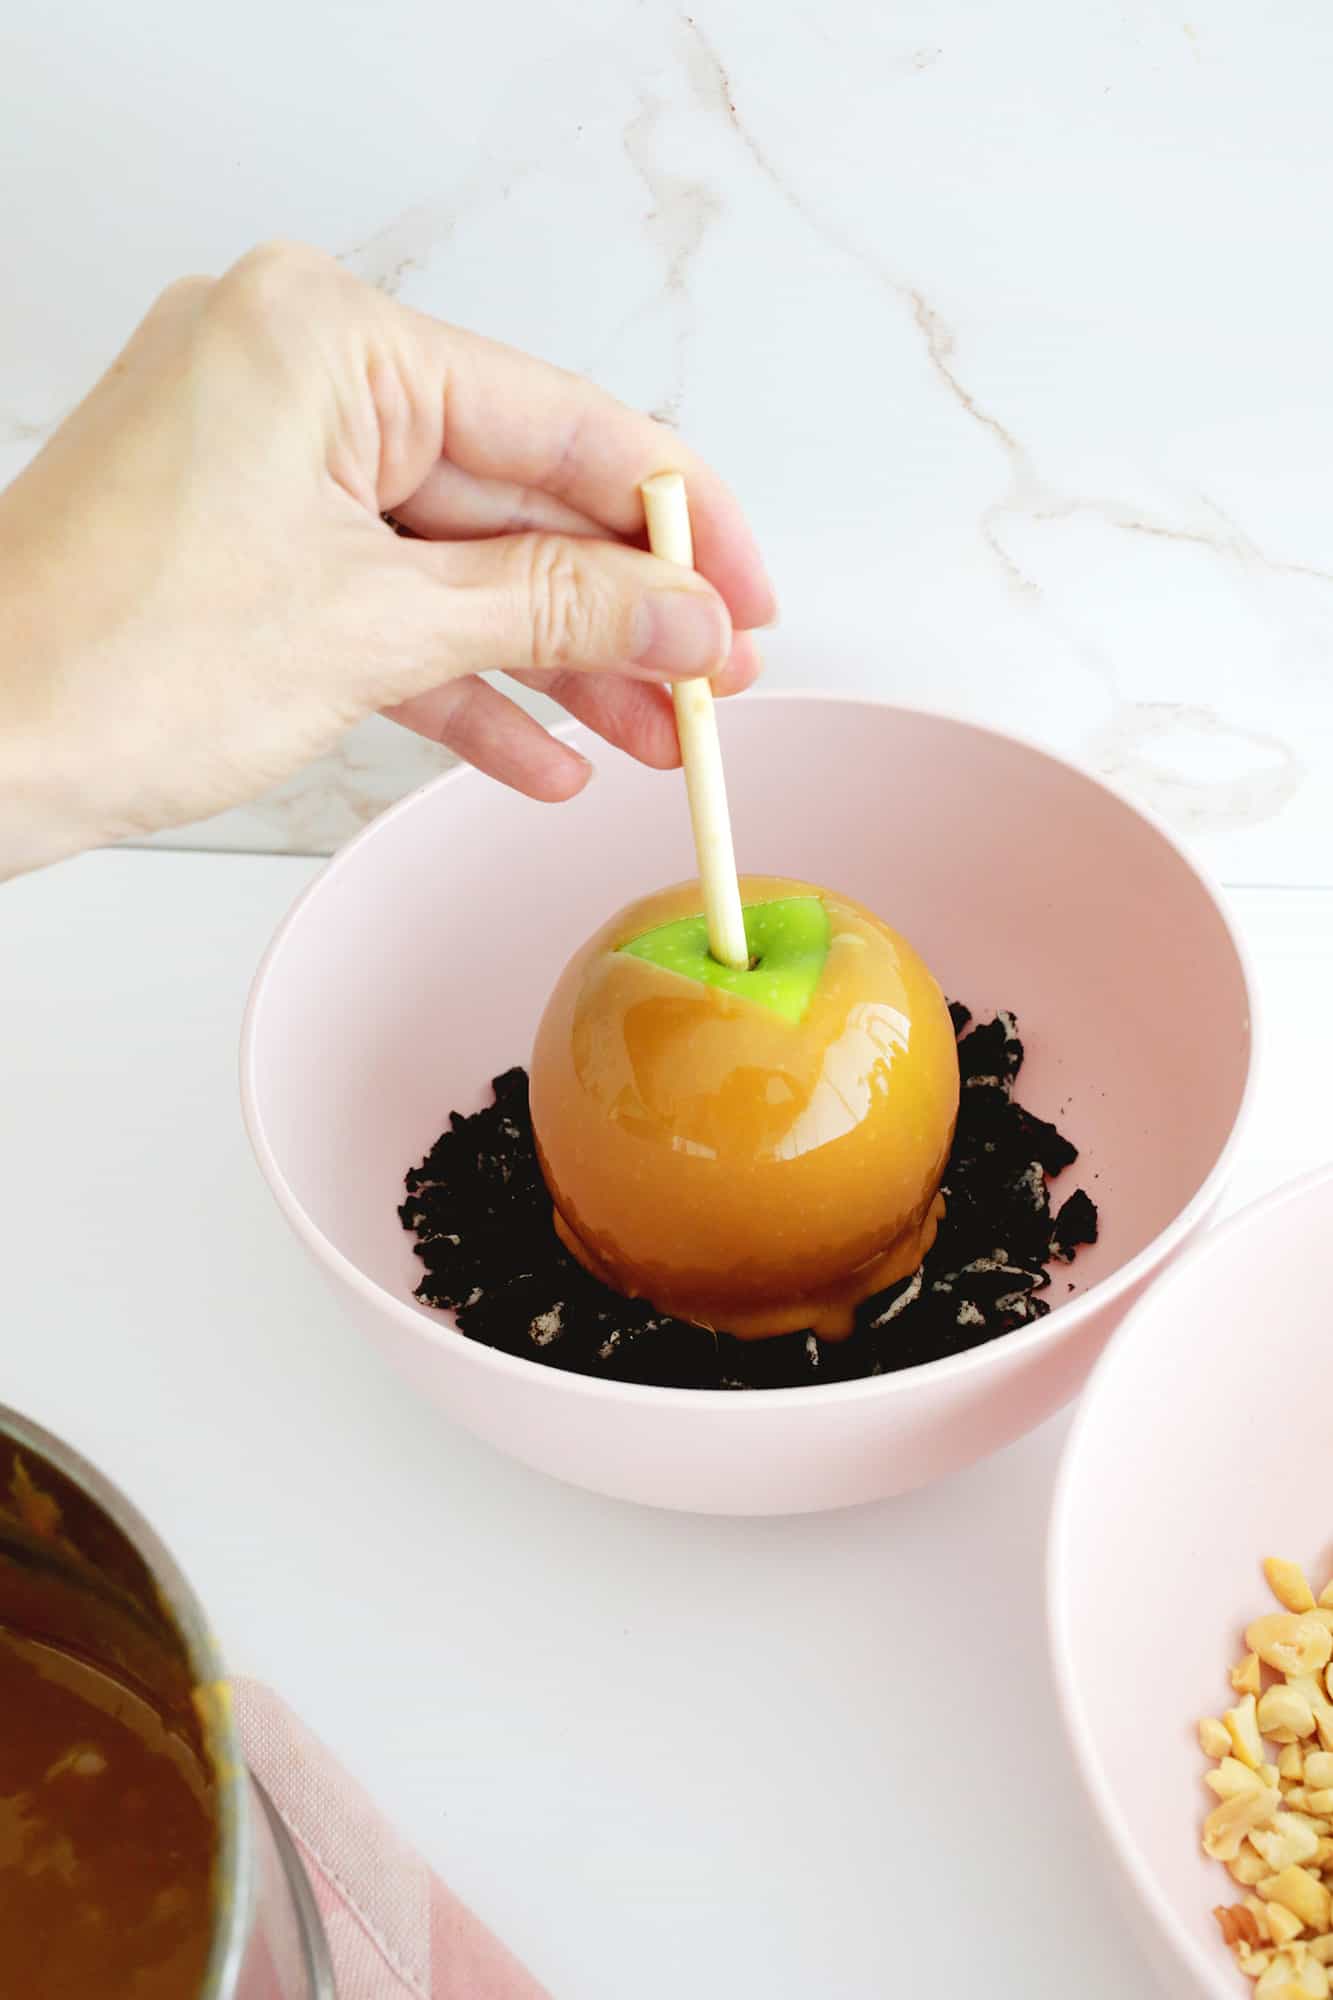 Caramel apple being dipped into crushed oreo